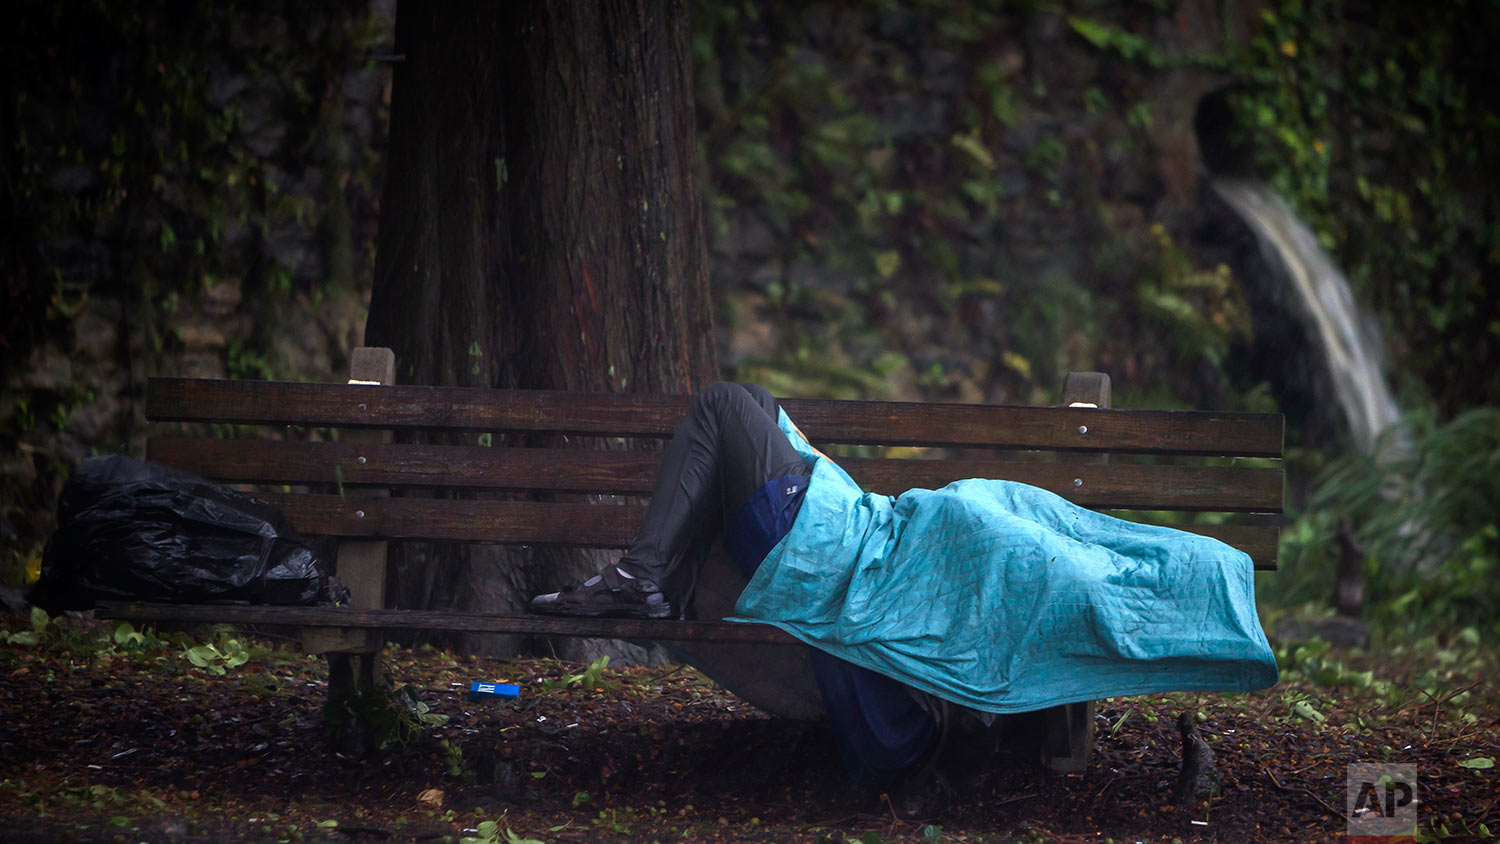  A homeless man lays on a bench on Historic River Street on Monday, Sept., 11, 2017, in Savannah, Ga., as Hurricane Irma starts to impact the area. (AP Photo/Stephen B. Morton) 